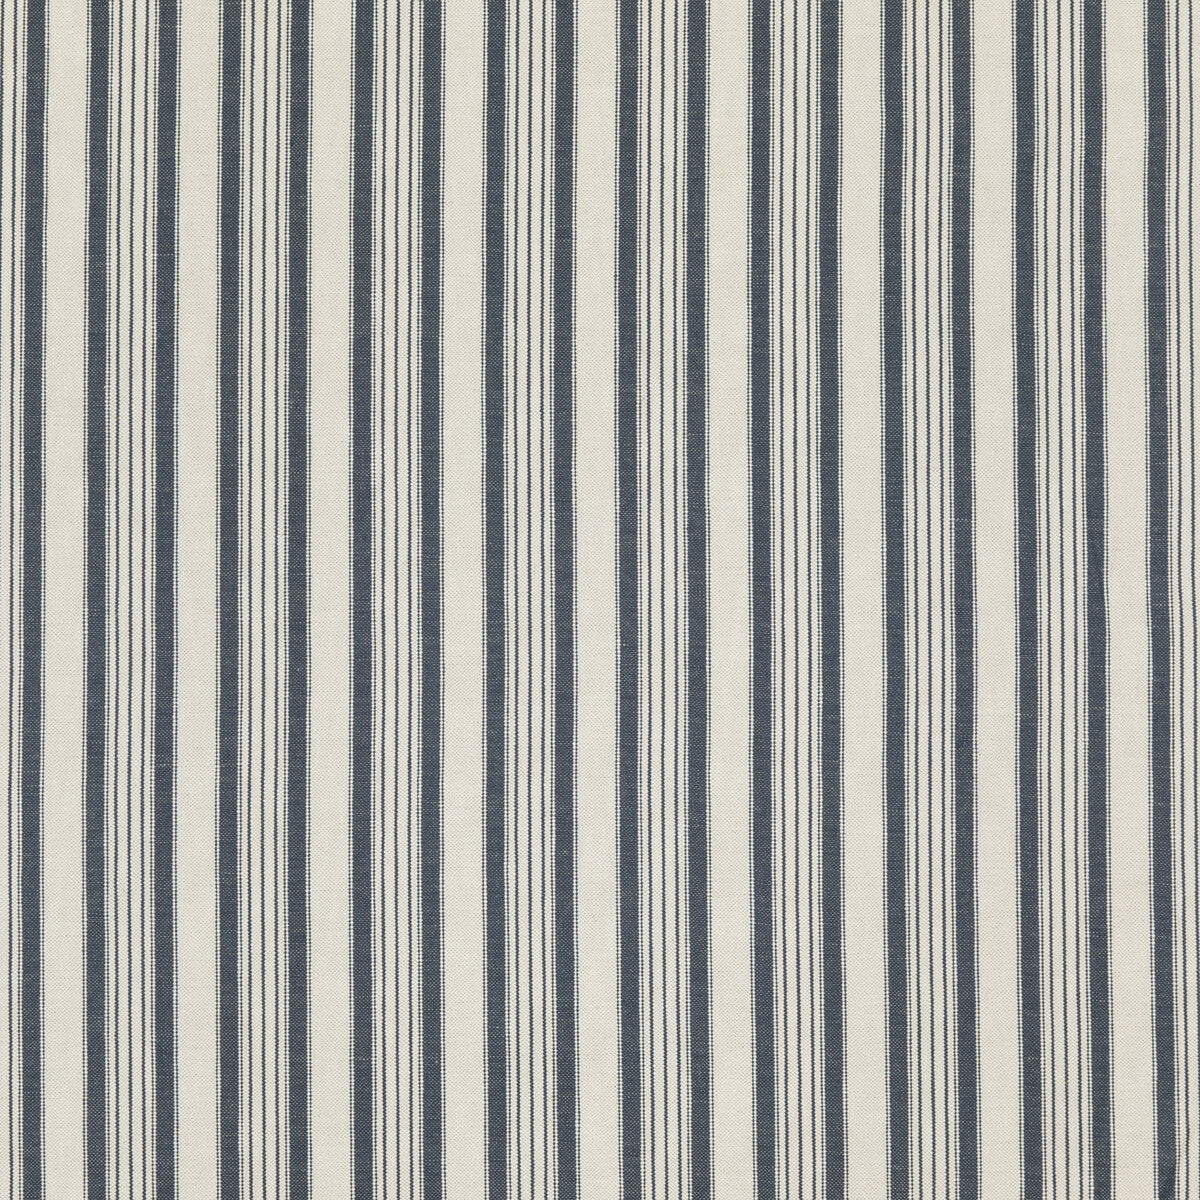 Becket fabric in indigo color - pattern ED85312.680.0 - by Threads in the Great Stripes collection